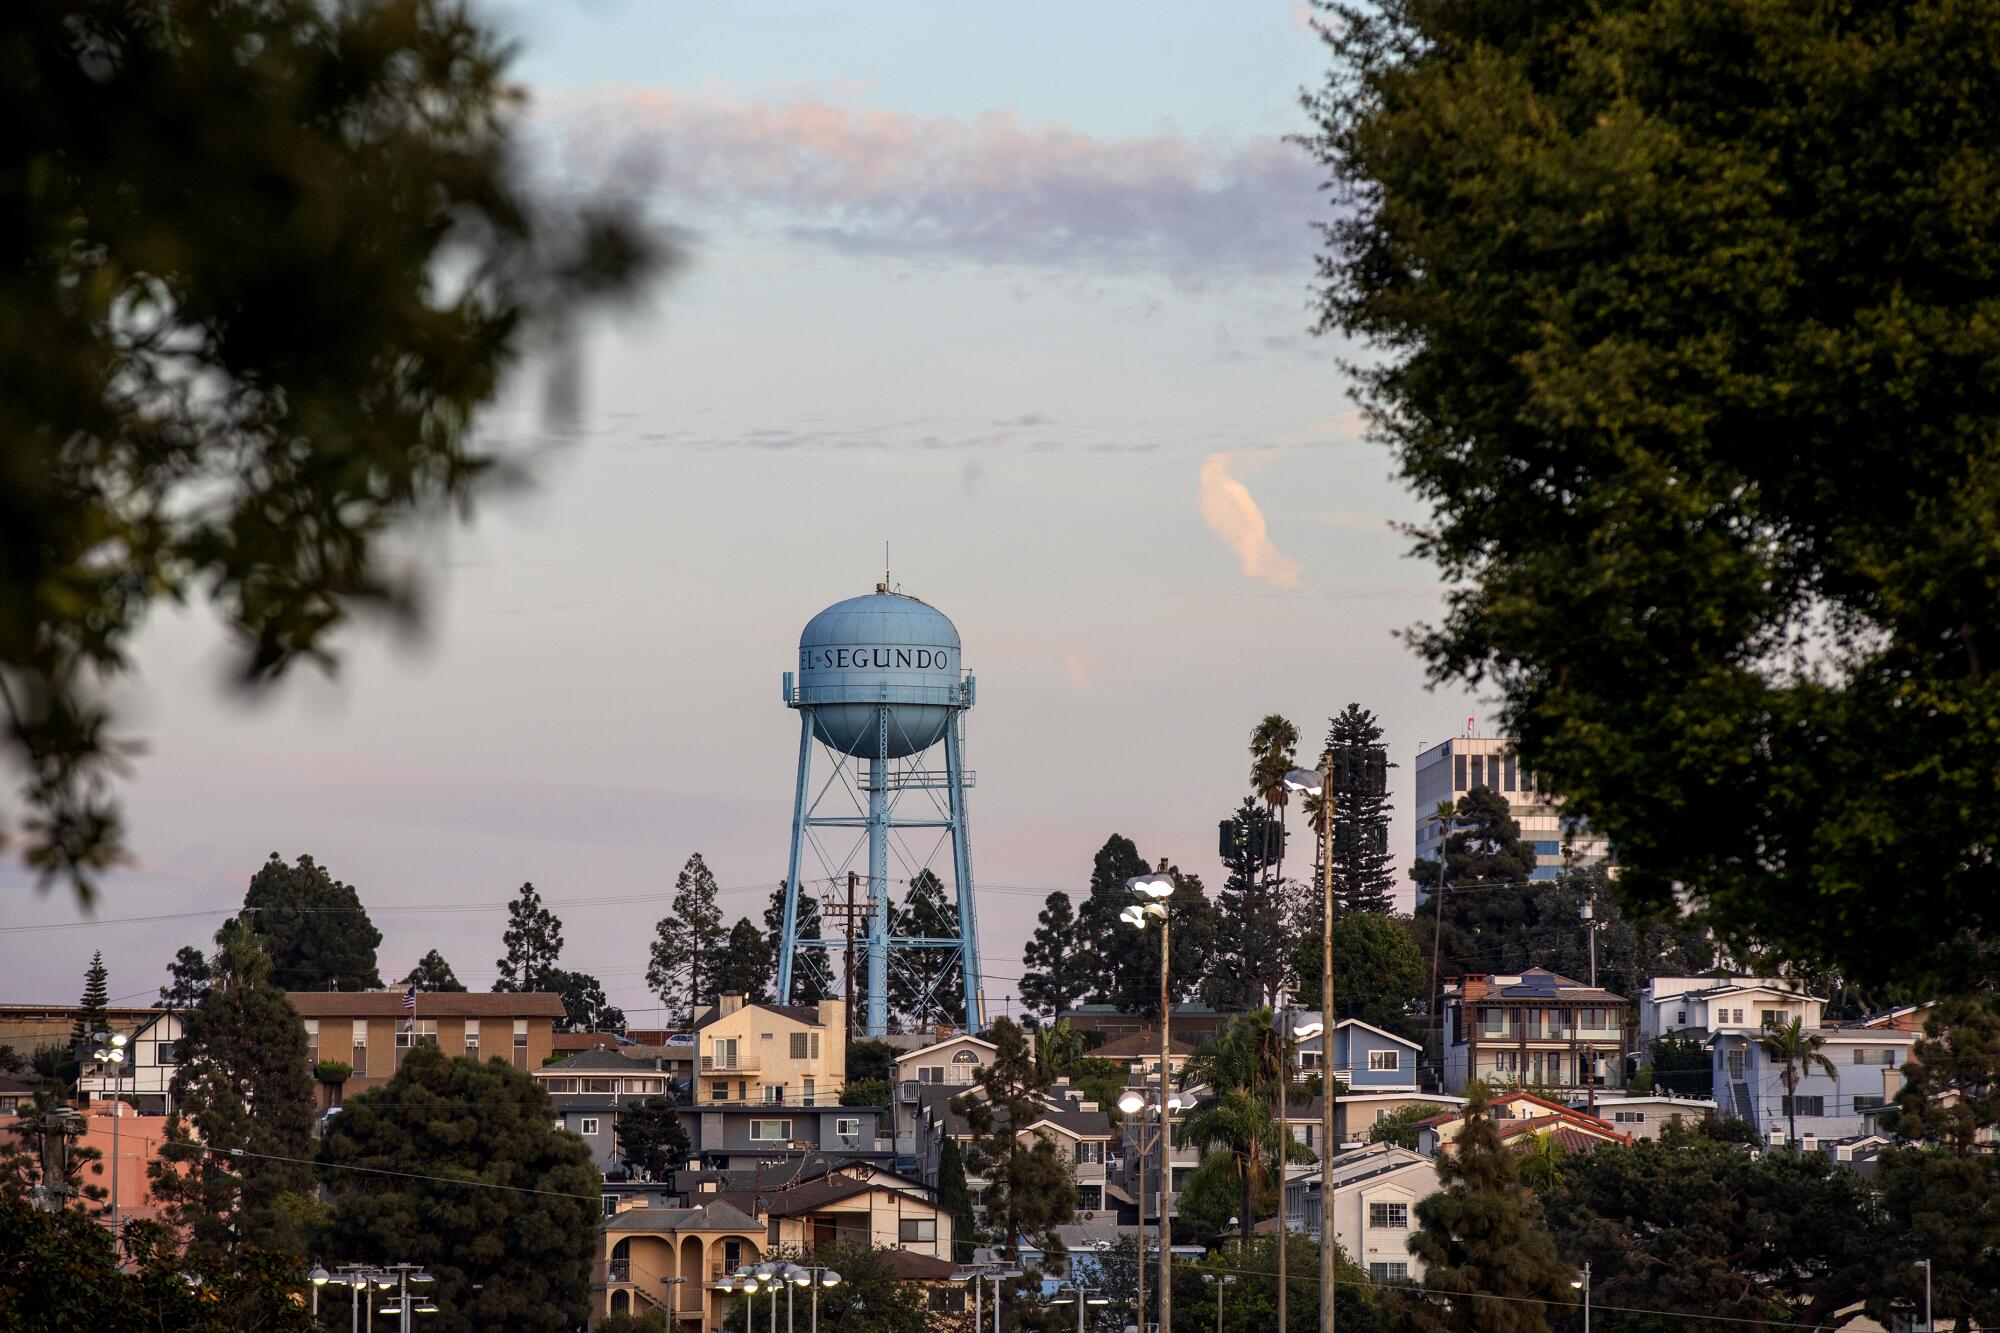 A water tower rises above a surrounding neighborhood  